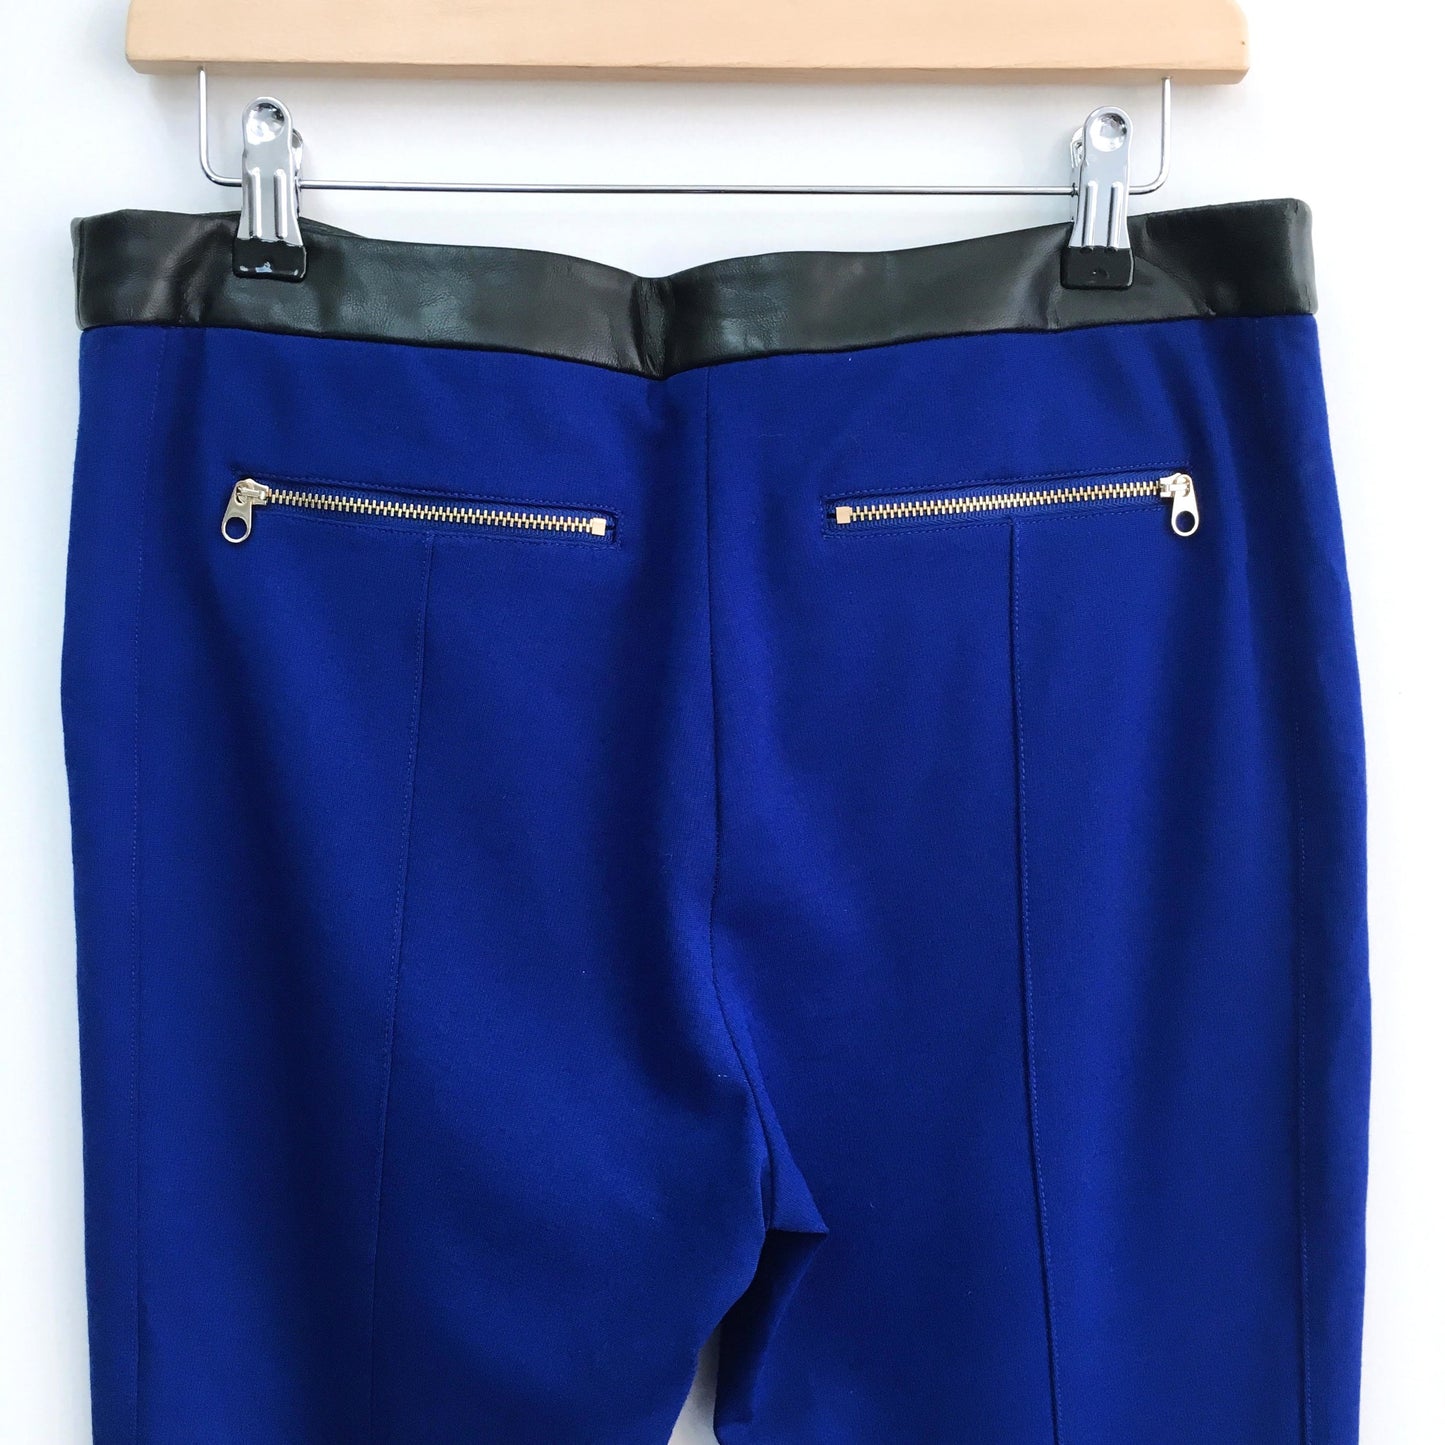 Ted Baker Electric Blue Trousers - size 3